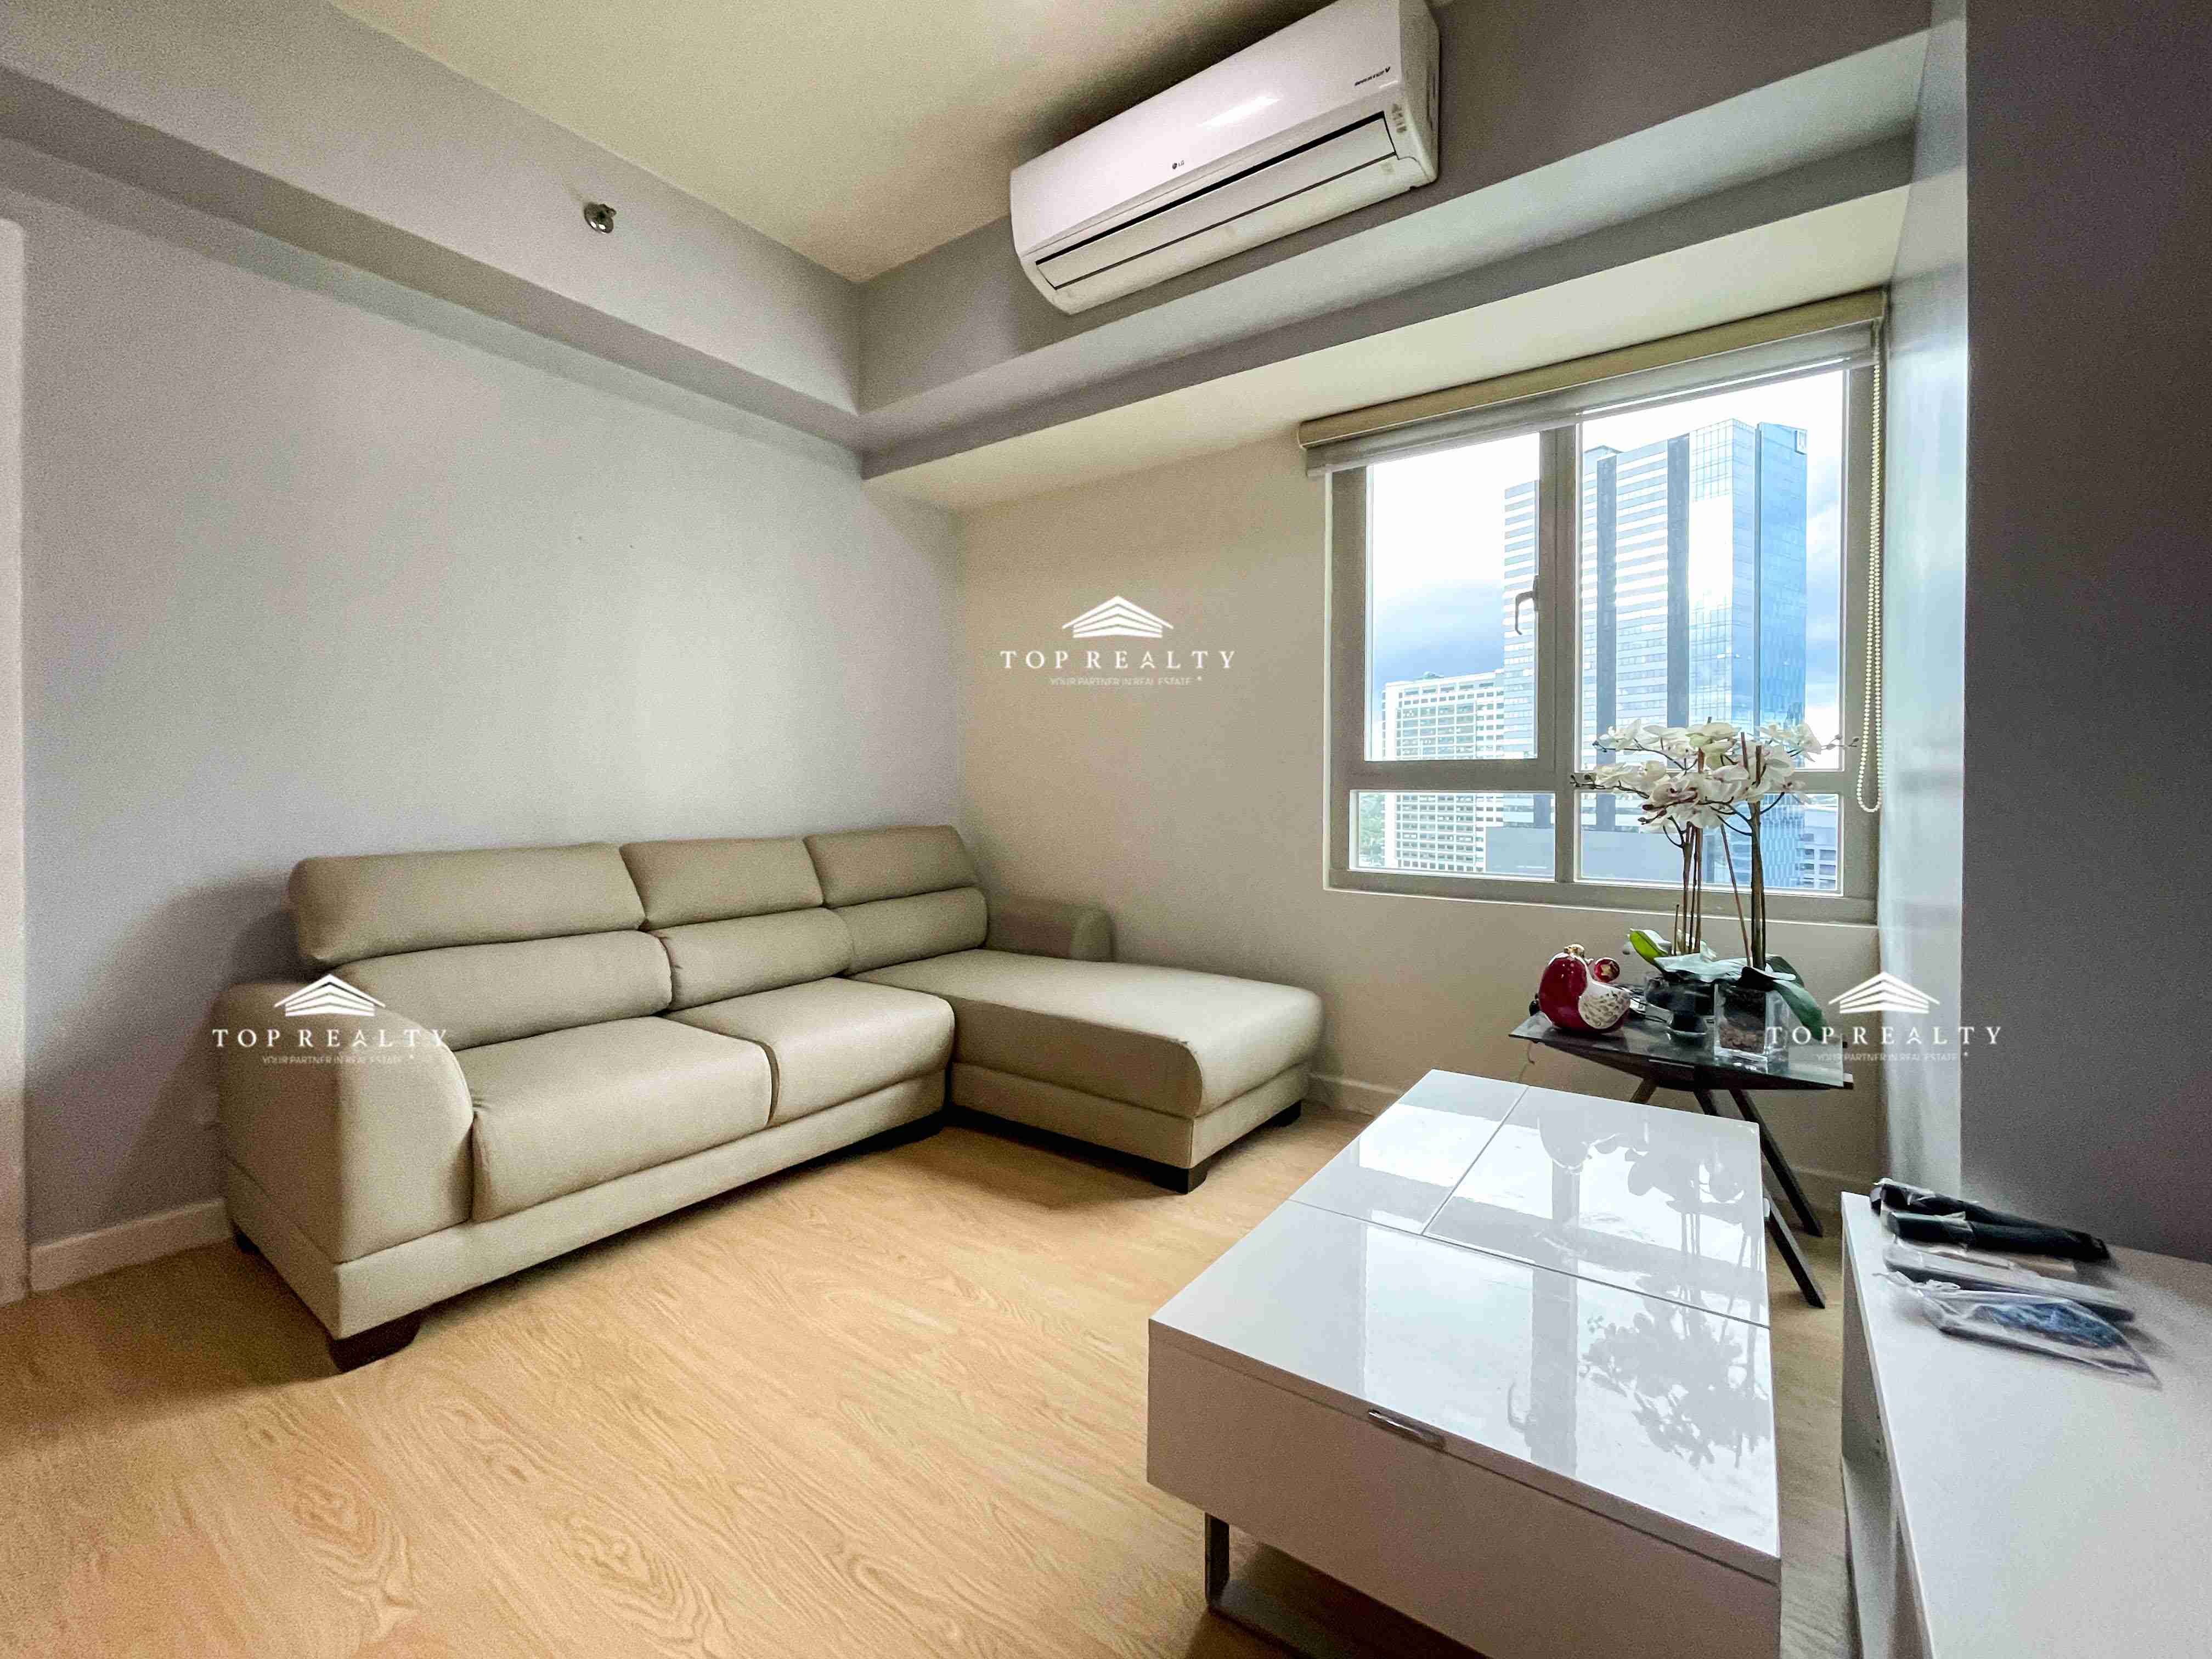 For Rent: 3BR Condo Unit in The Grove by Rockwell, Pasig City